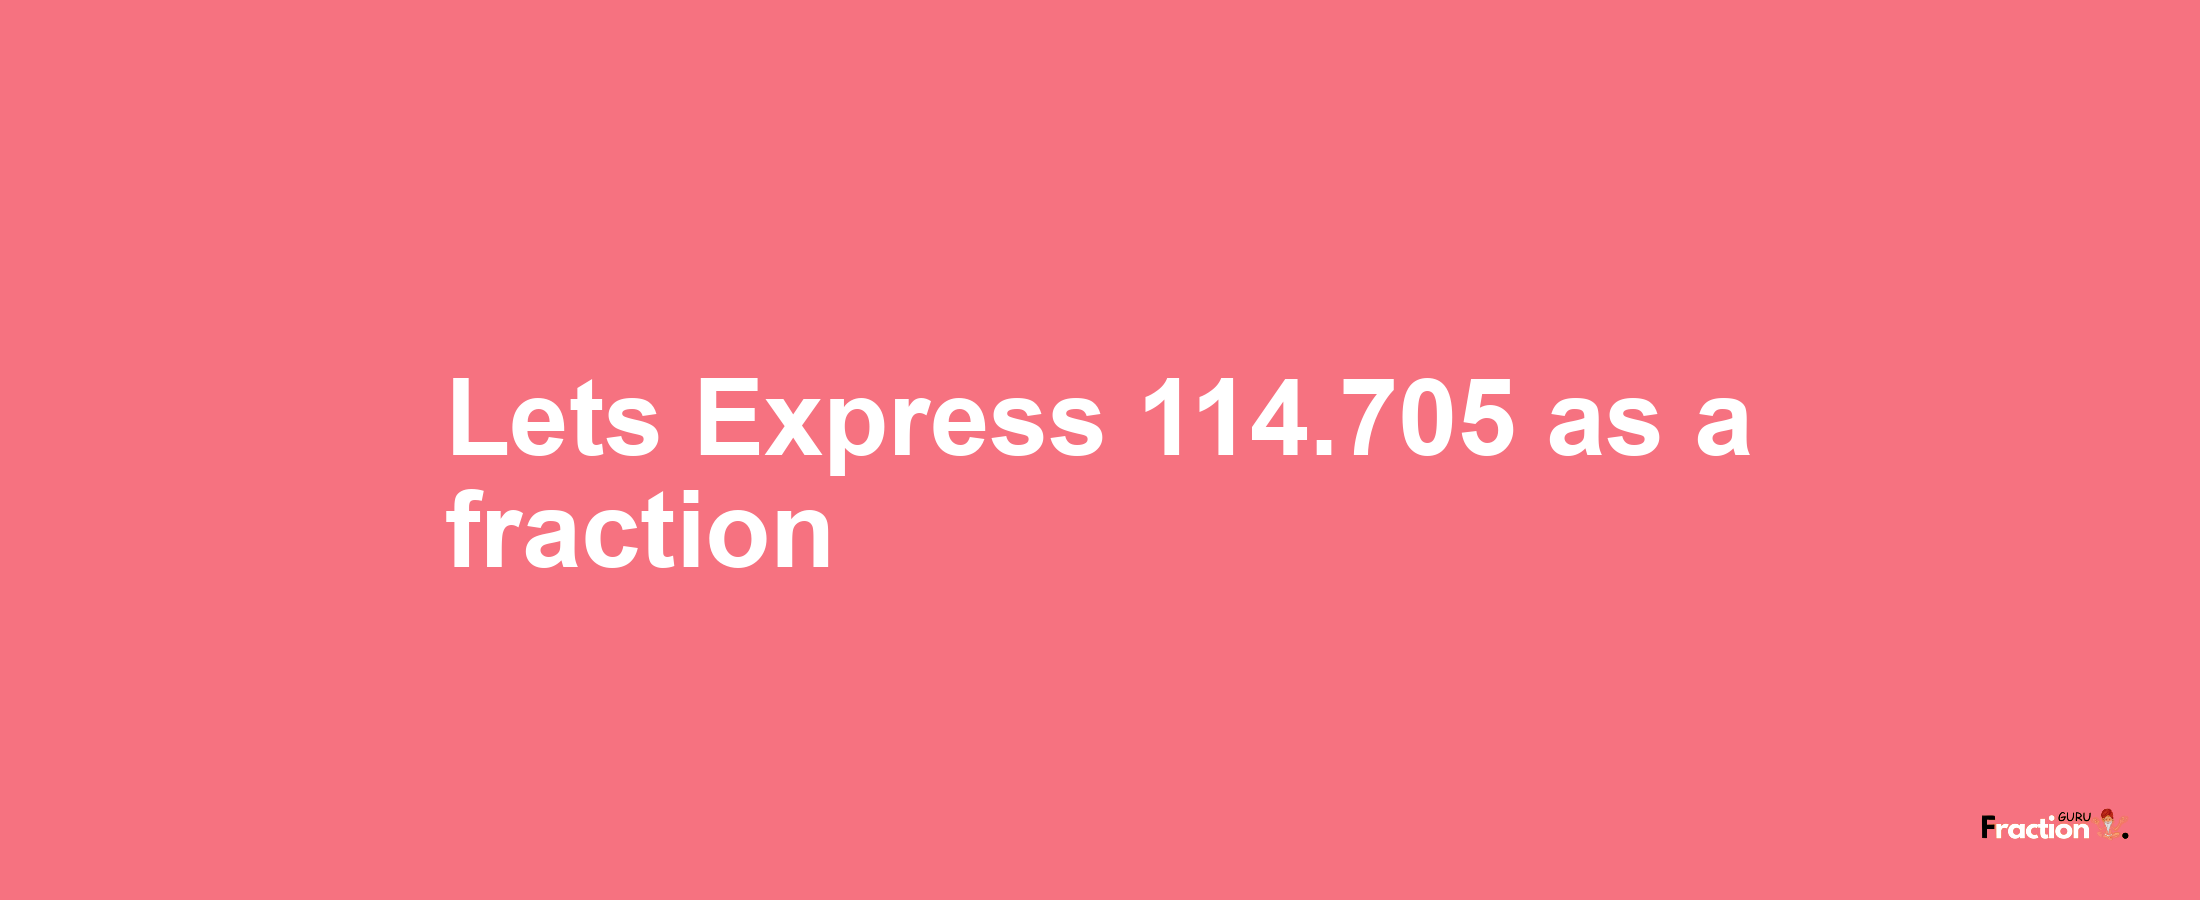 Lets Express 114.705 as afraction